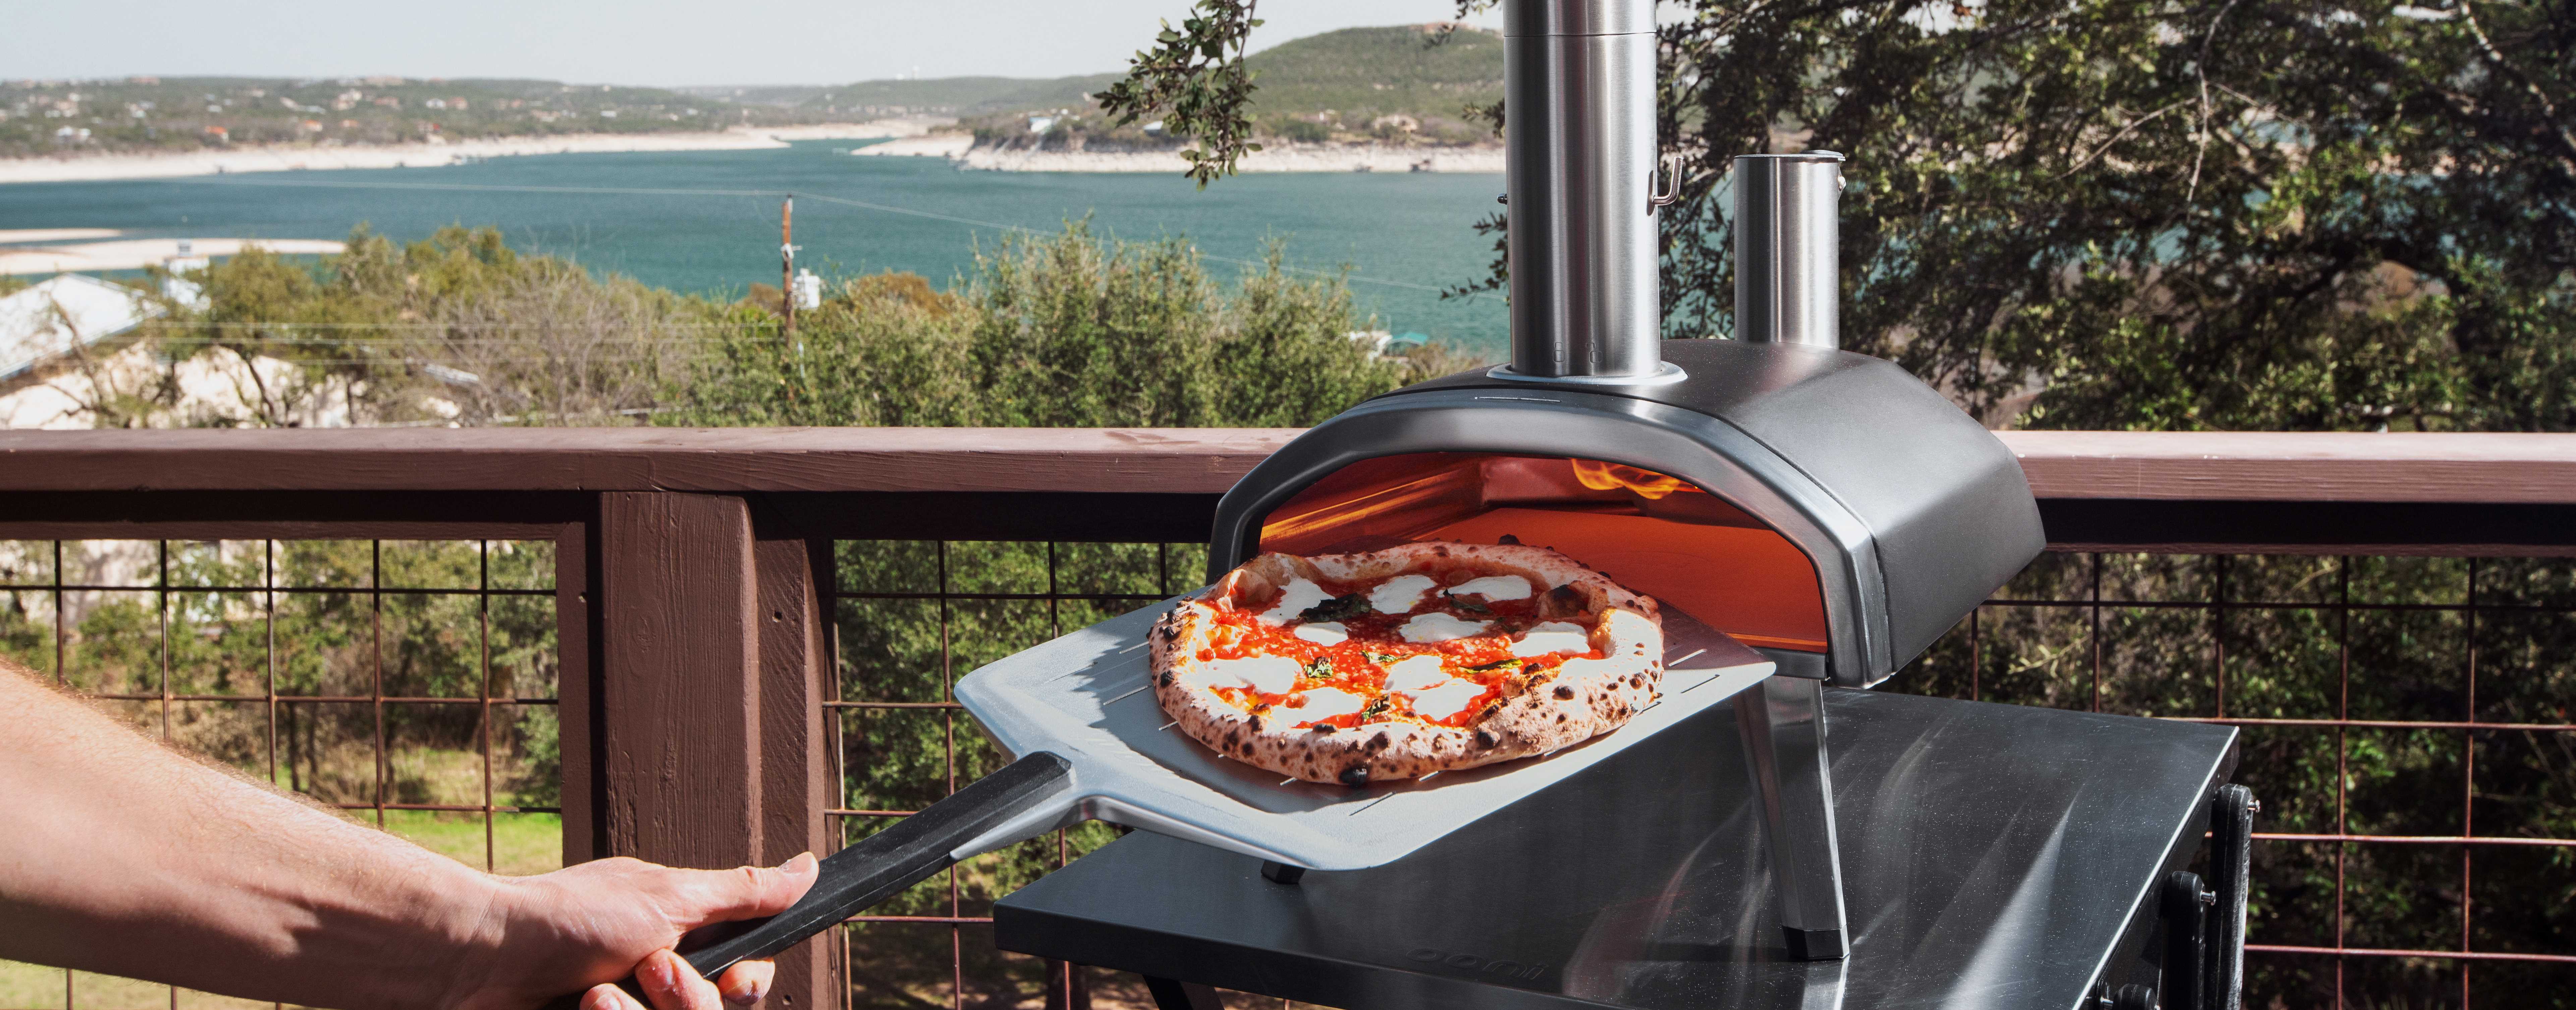 ooni Fyra 12 Wood Fired Outdoor Pizza Oven - Portable Hard Wood Pellet  Pizza Oven - Ideal for Any Outdoor Kitchen - Outdoor Cooking Pizza Maker 